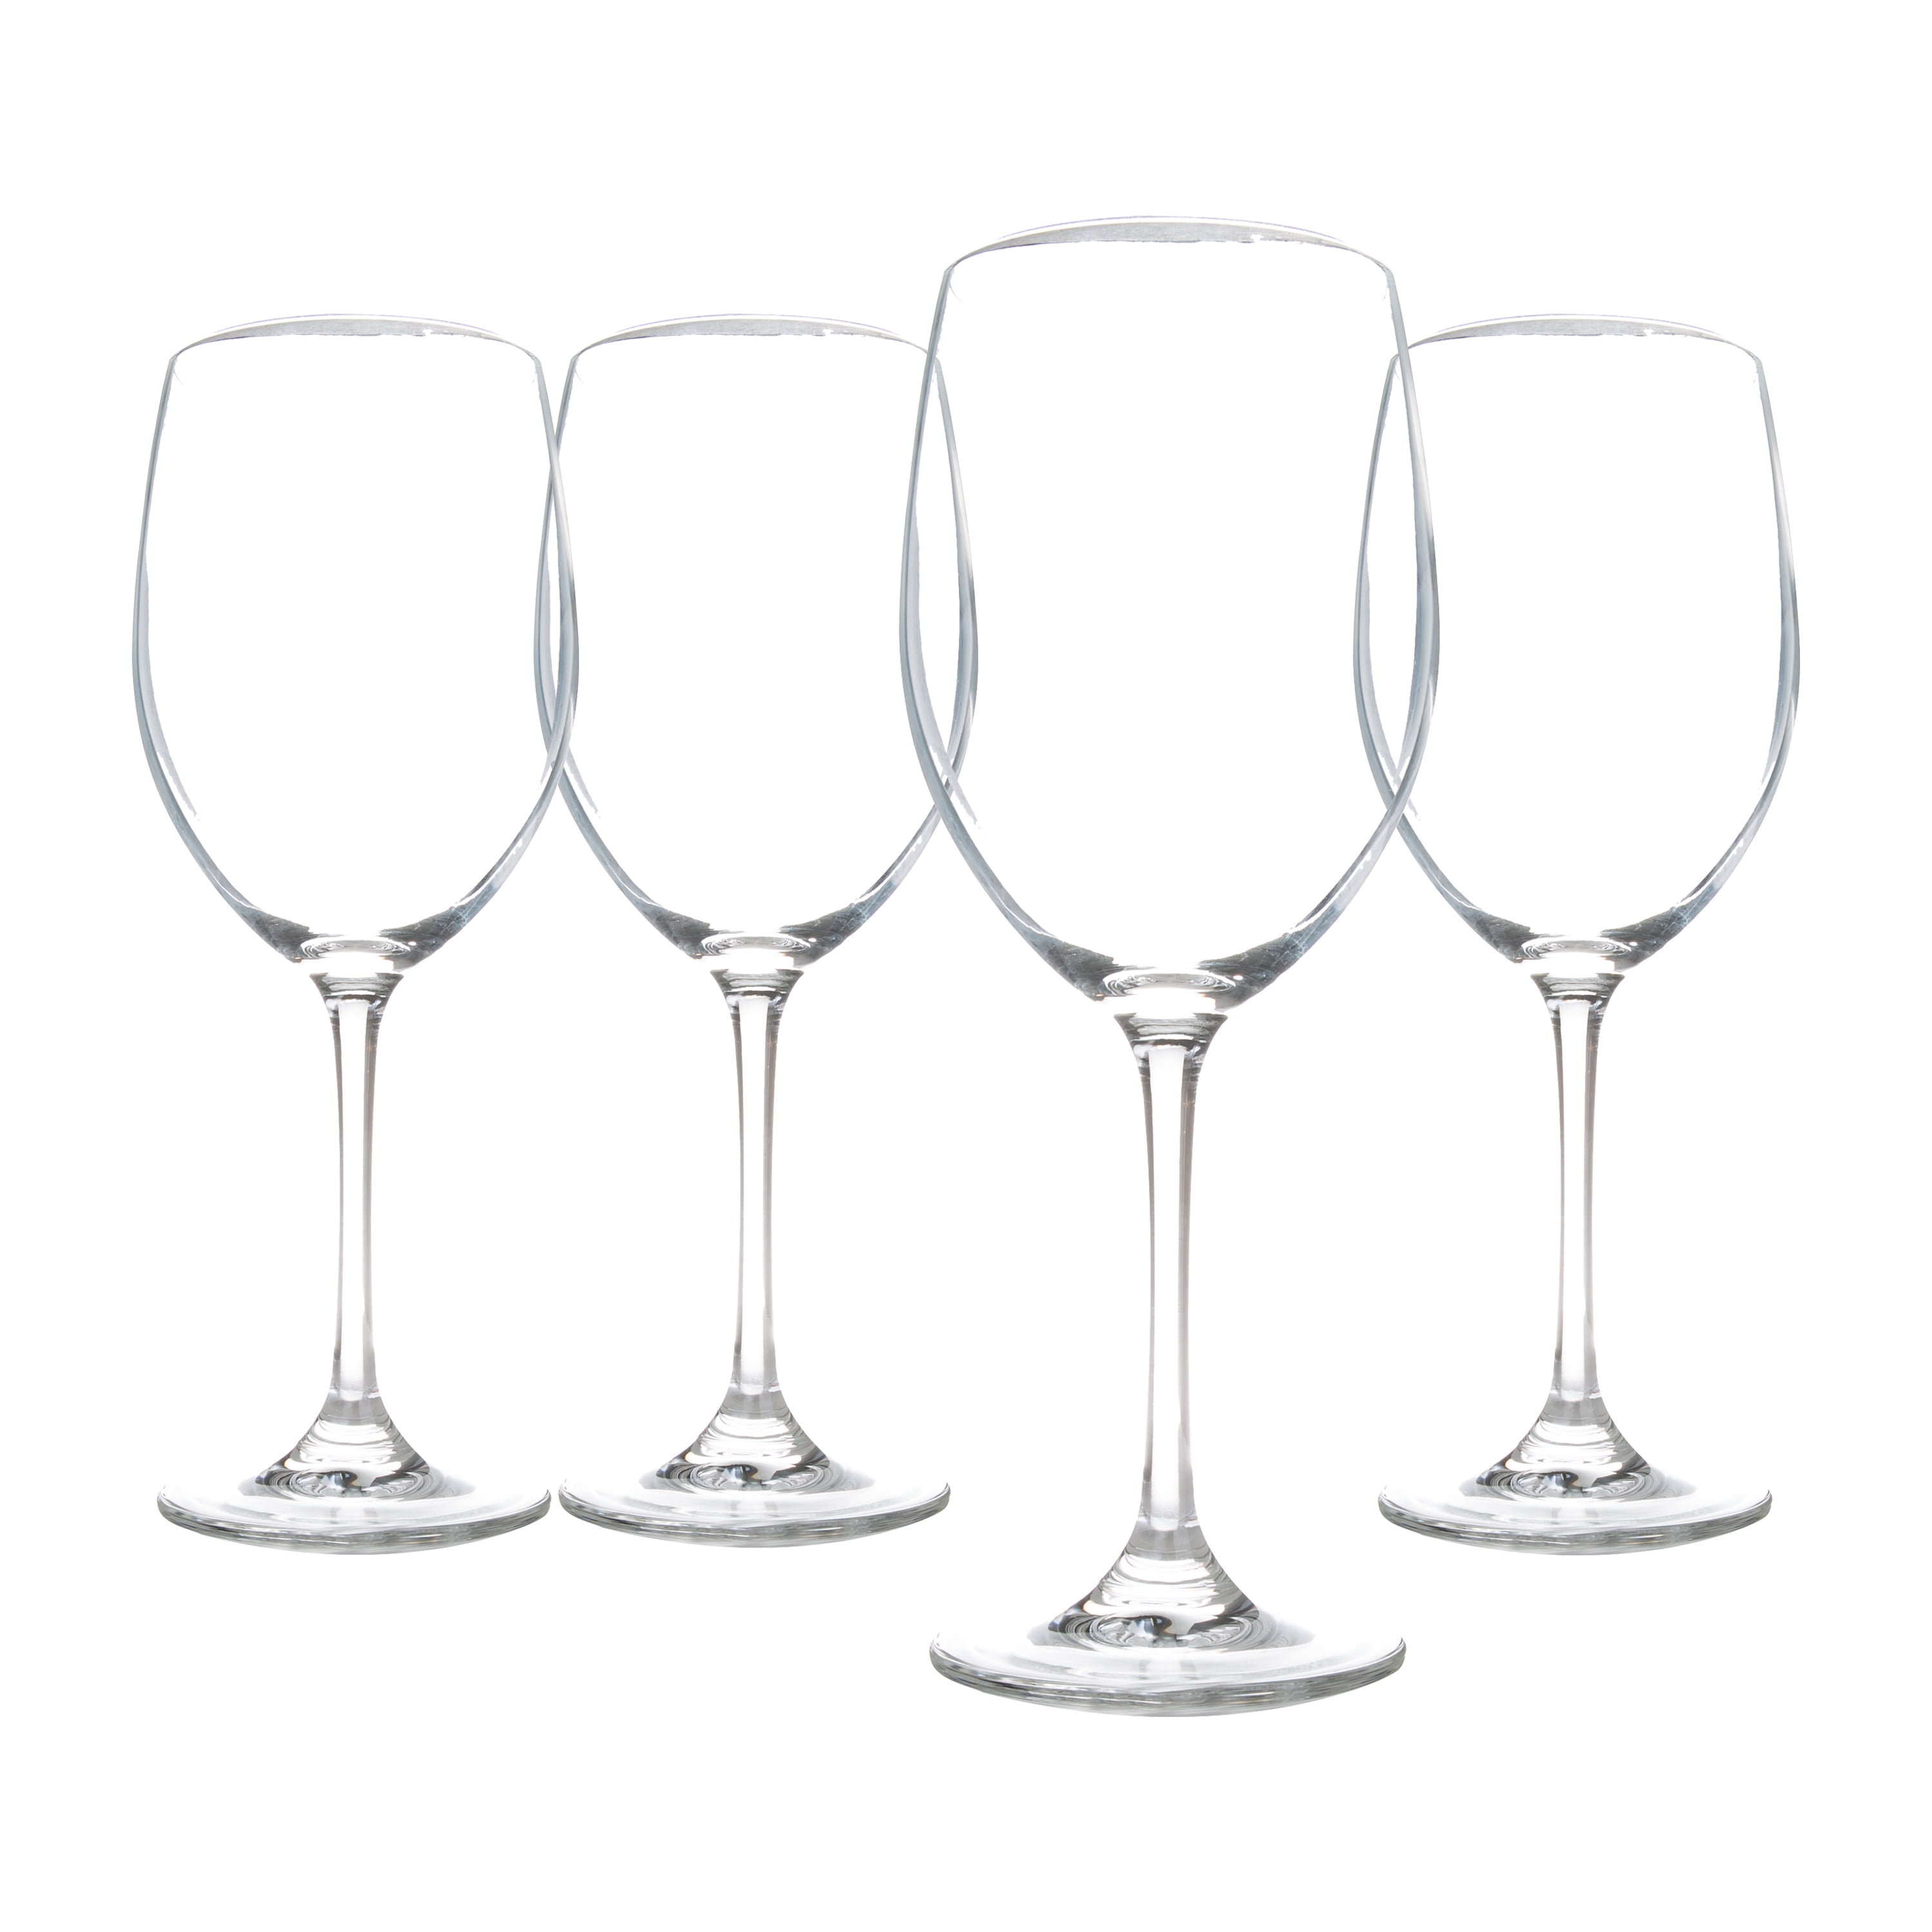 Burns Glass Clear Wine Glass Set of 4, 10 Oz Red